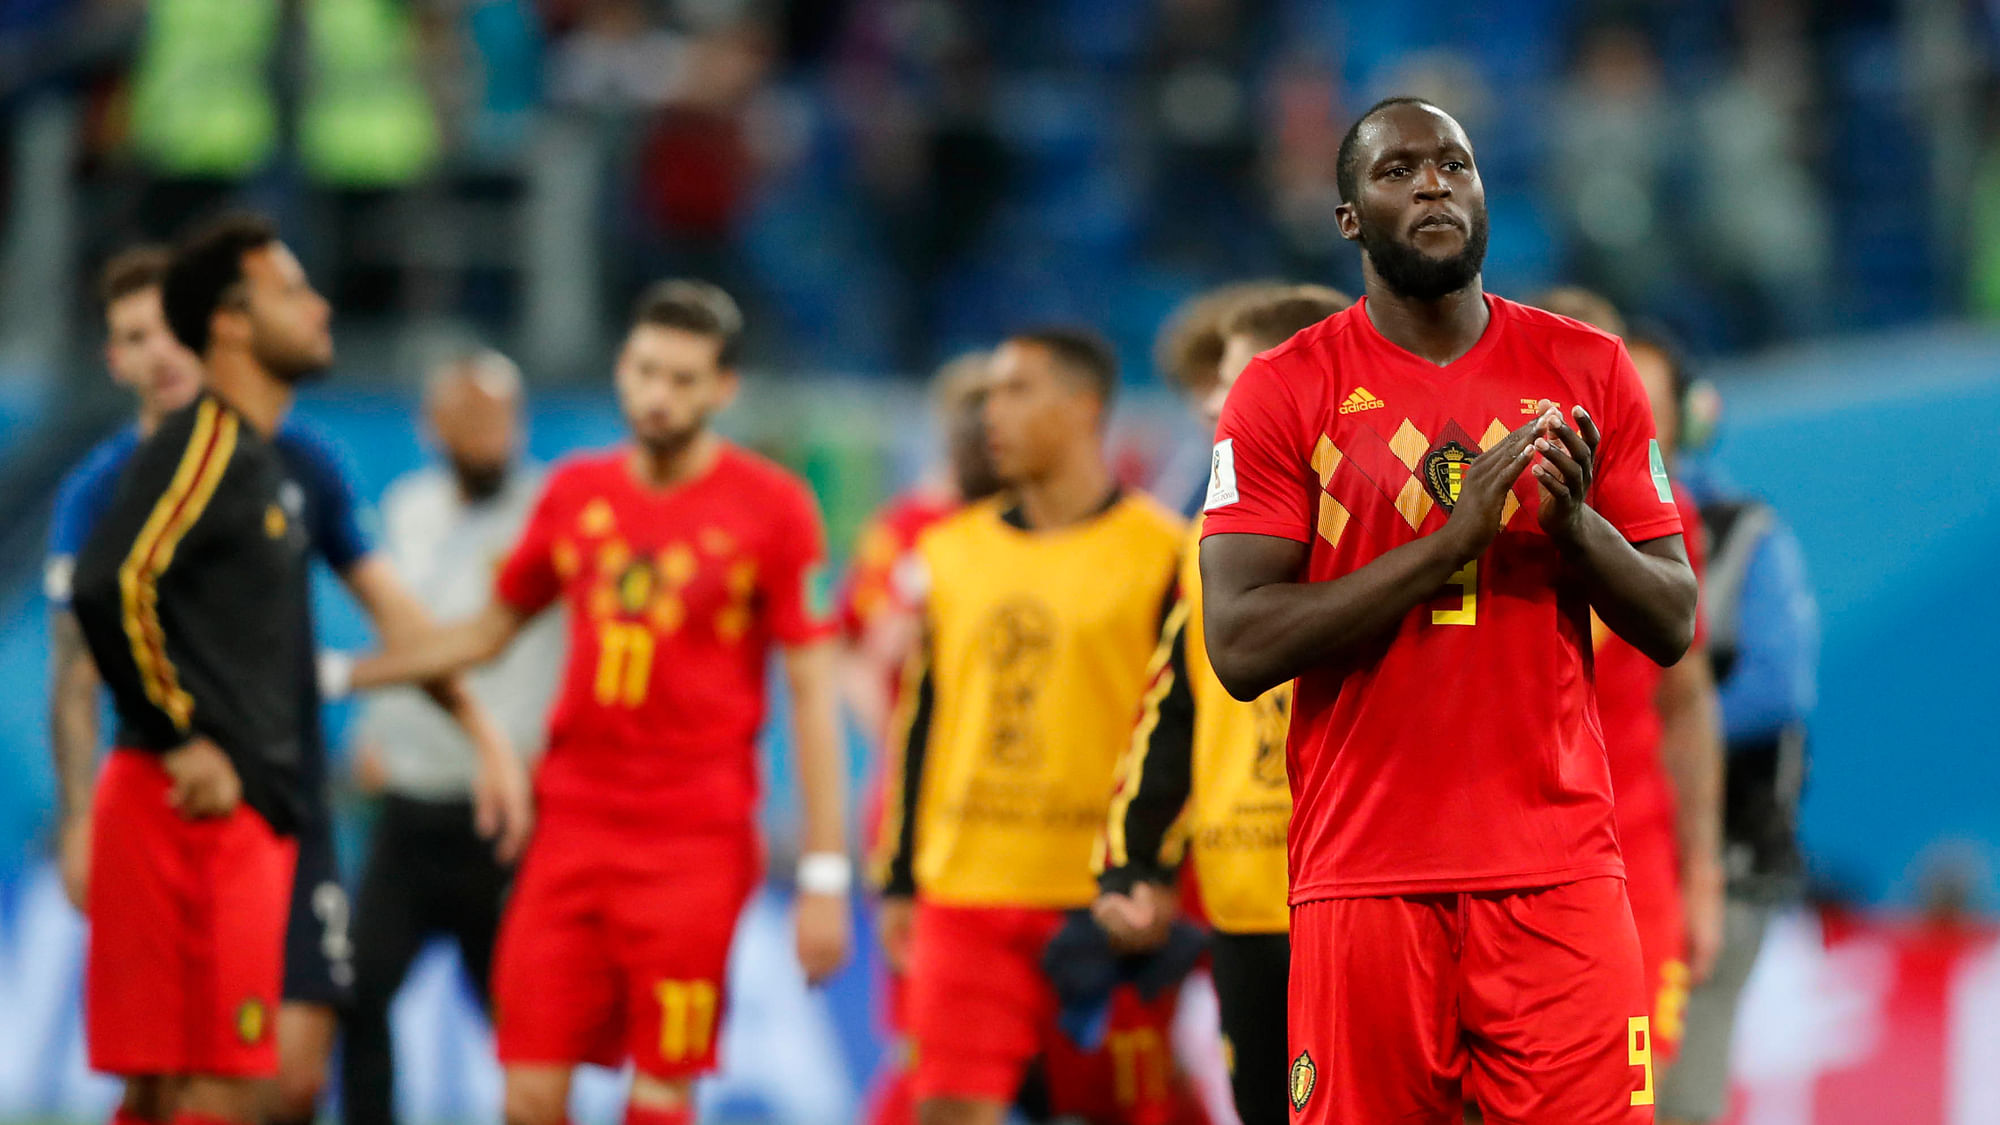 Belgium’s Romelu Lukaku applauds to supporters after the semifinal match between France and Belgium at the 2018 soccer World Cup in the St. Petersburg Stadium in, St. Petersburg, Russia, Tuesday, July 10, 2018. (AP Photo/Frank Augstein)